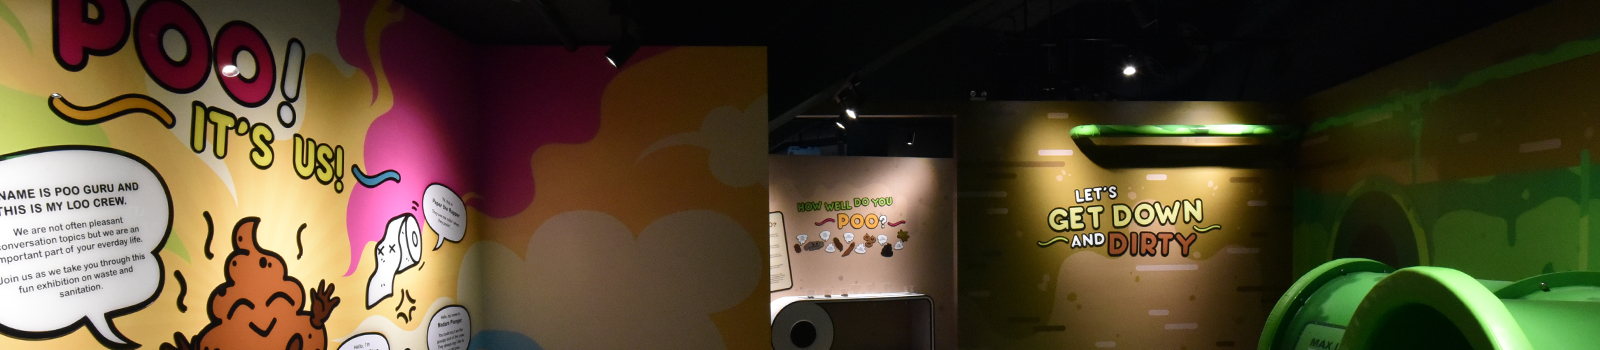 Things To Do In Sg This Weekend Know Your Poo Exhibition Science 